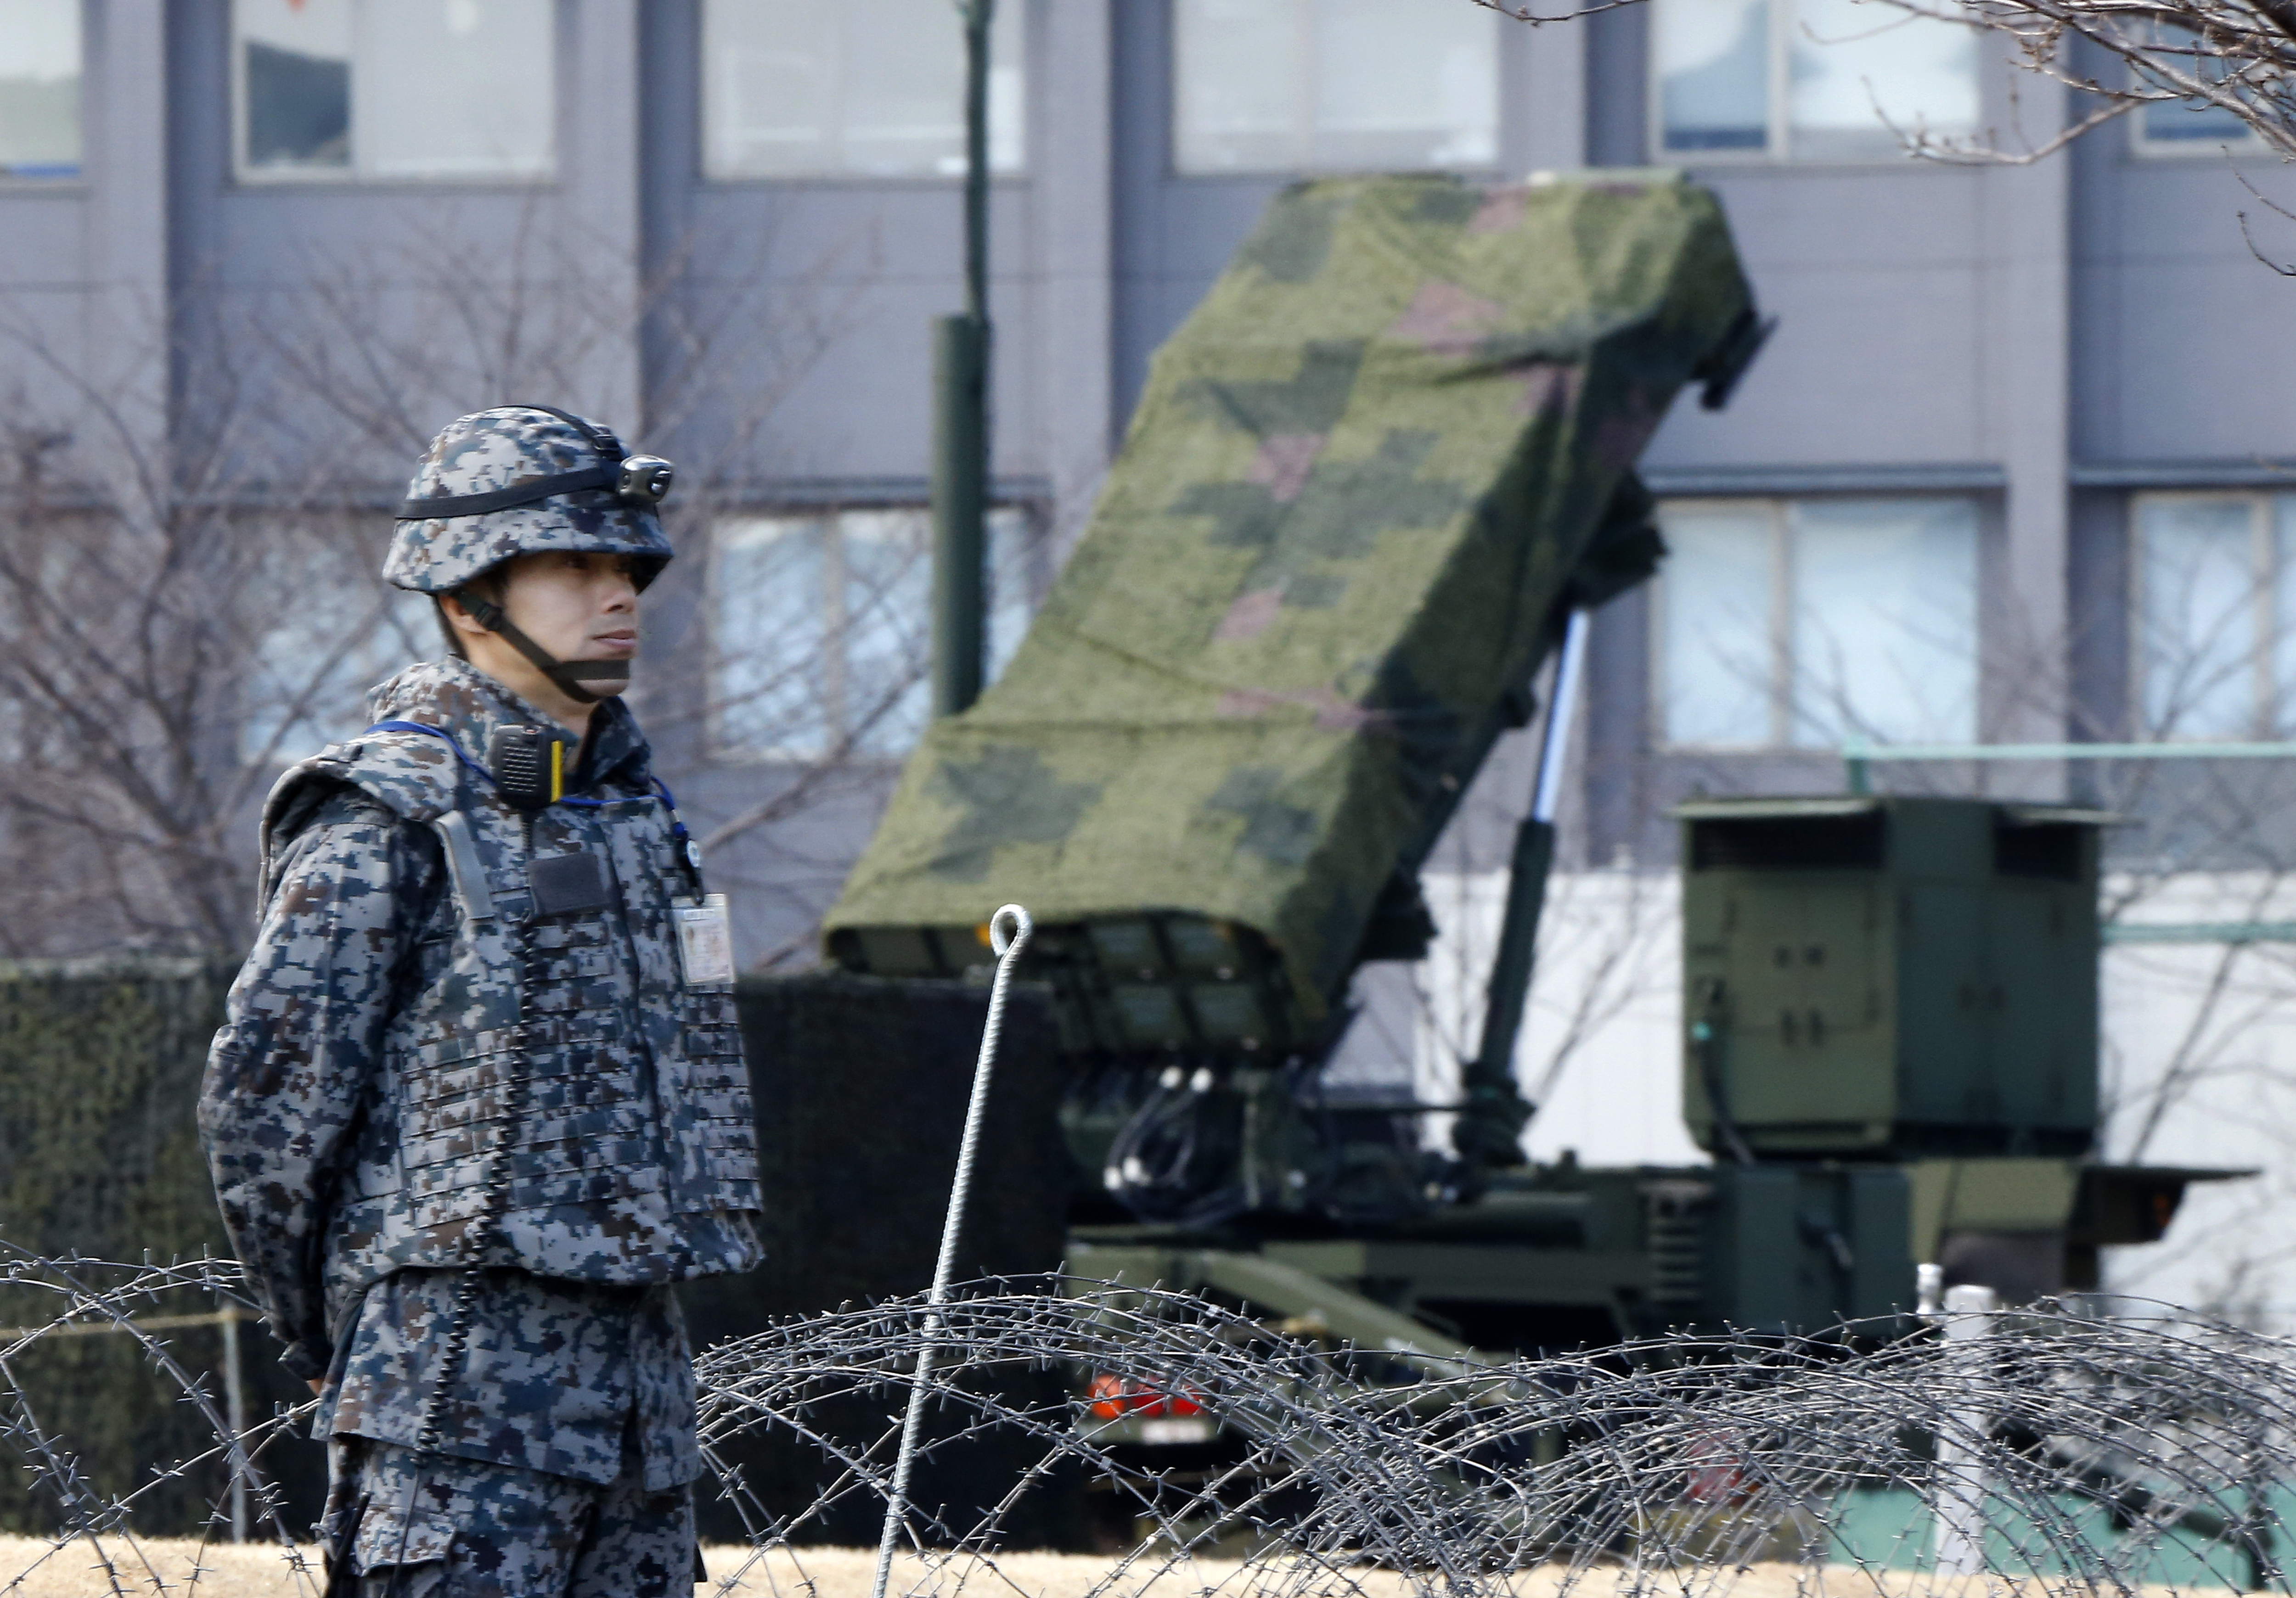 Japan may accelerate missile defense upgrades in wake of North Korean tests: sources